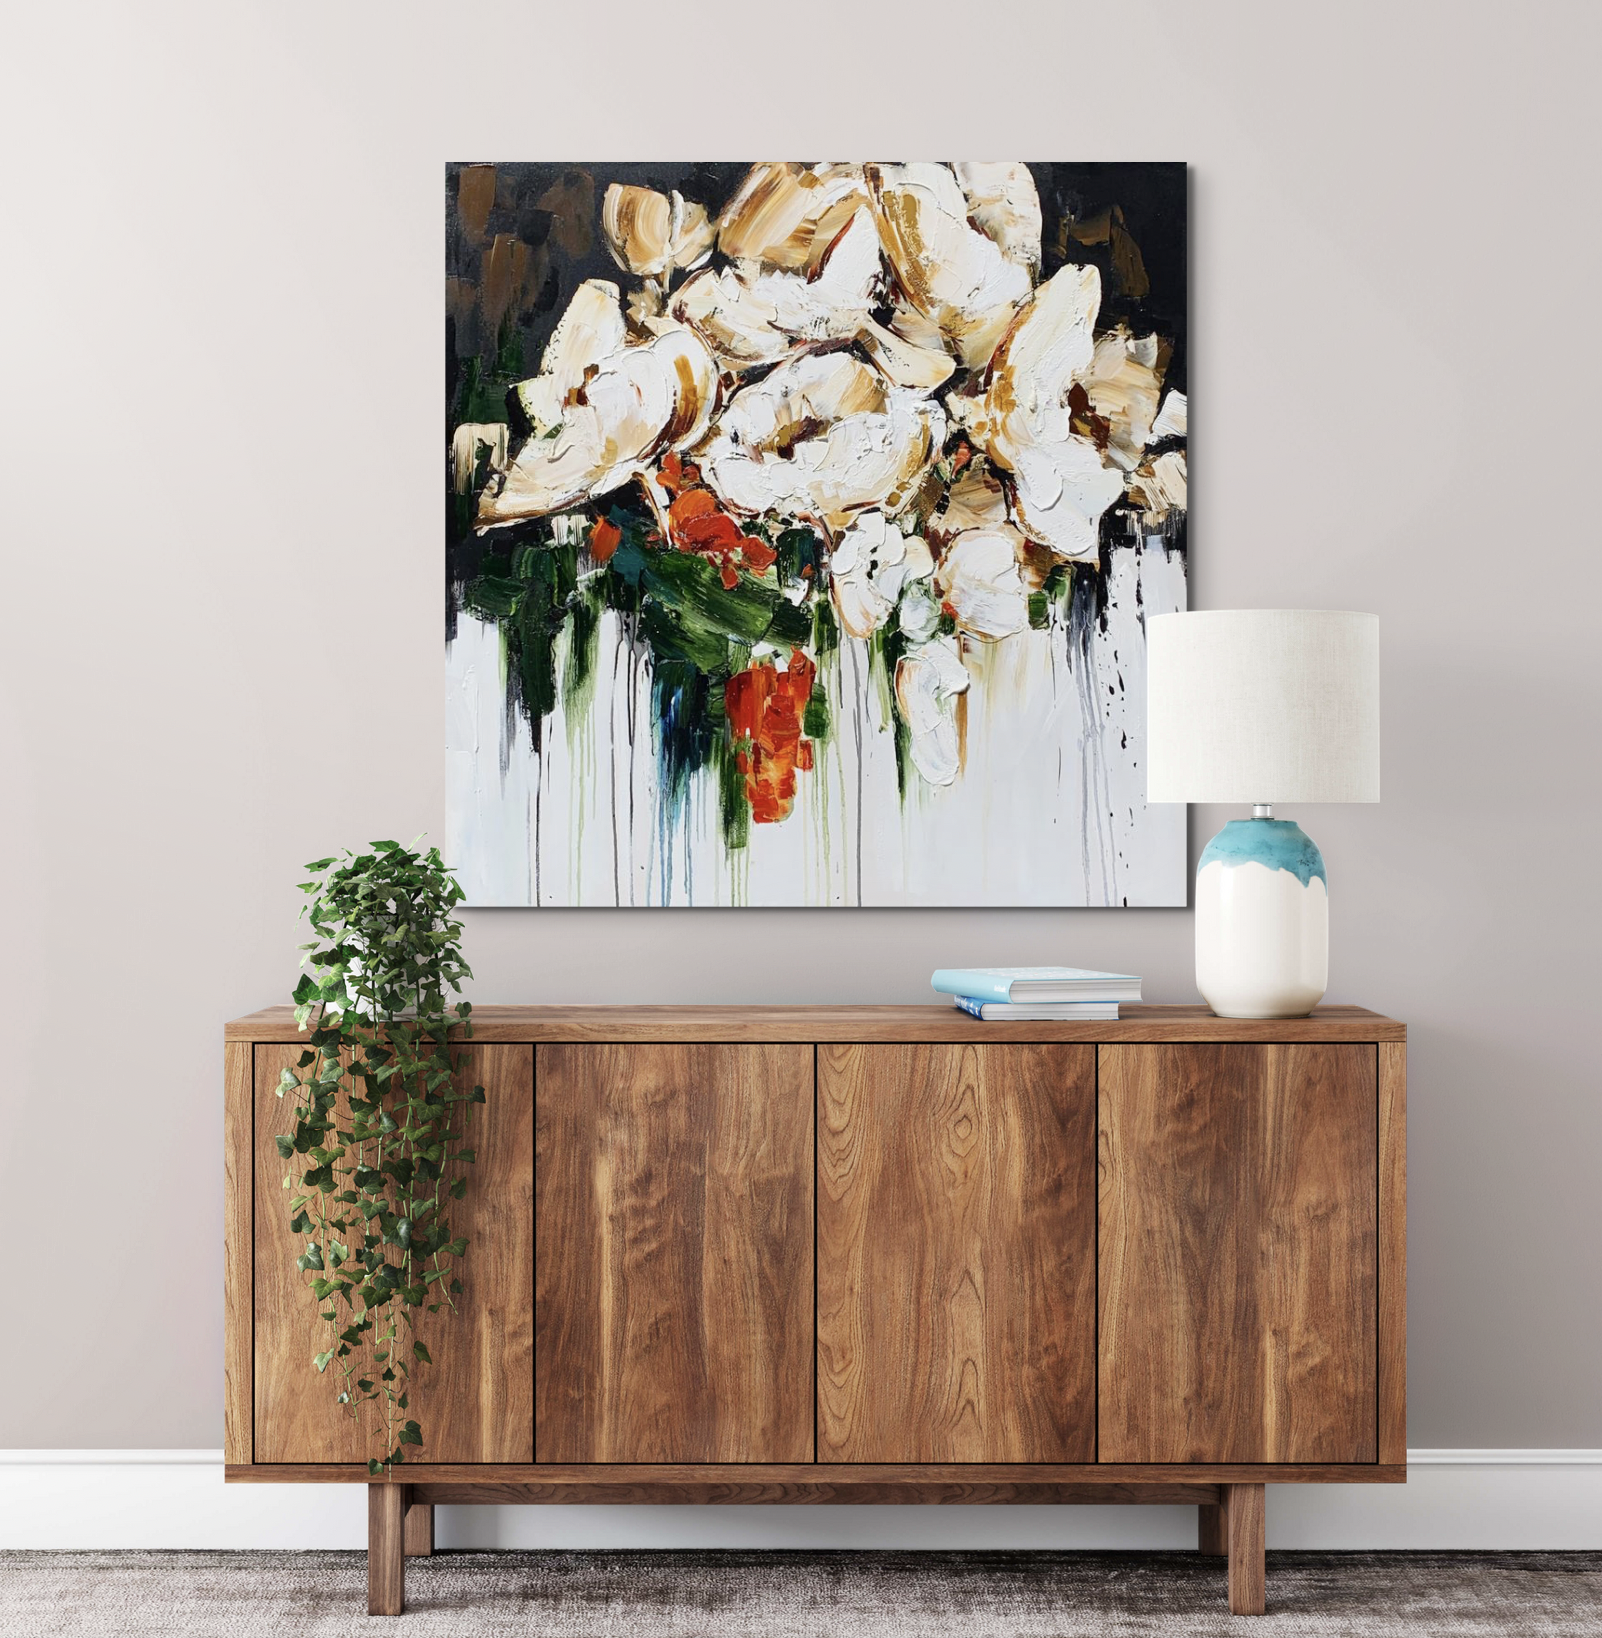 Kimberly Kiel oil painting of white and orange flowers with green leaves dripping own a white canvas above a wooden mid-century modern cabinet.